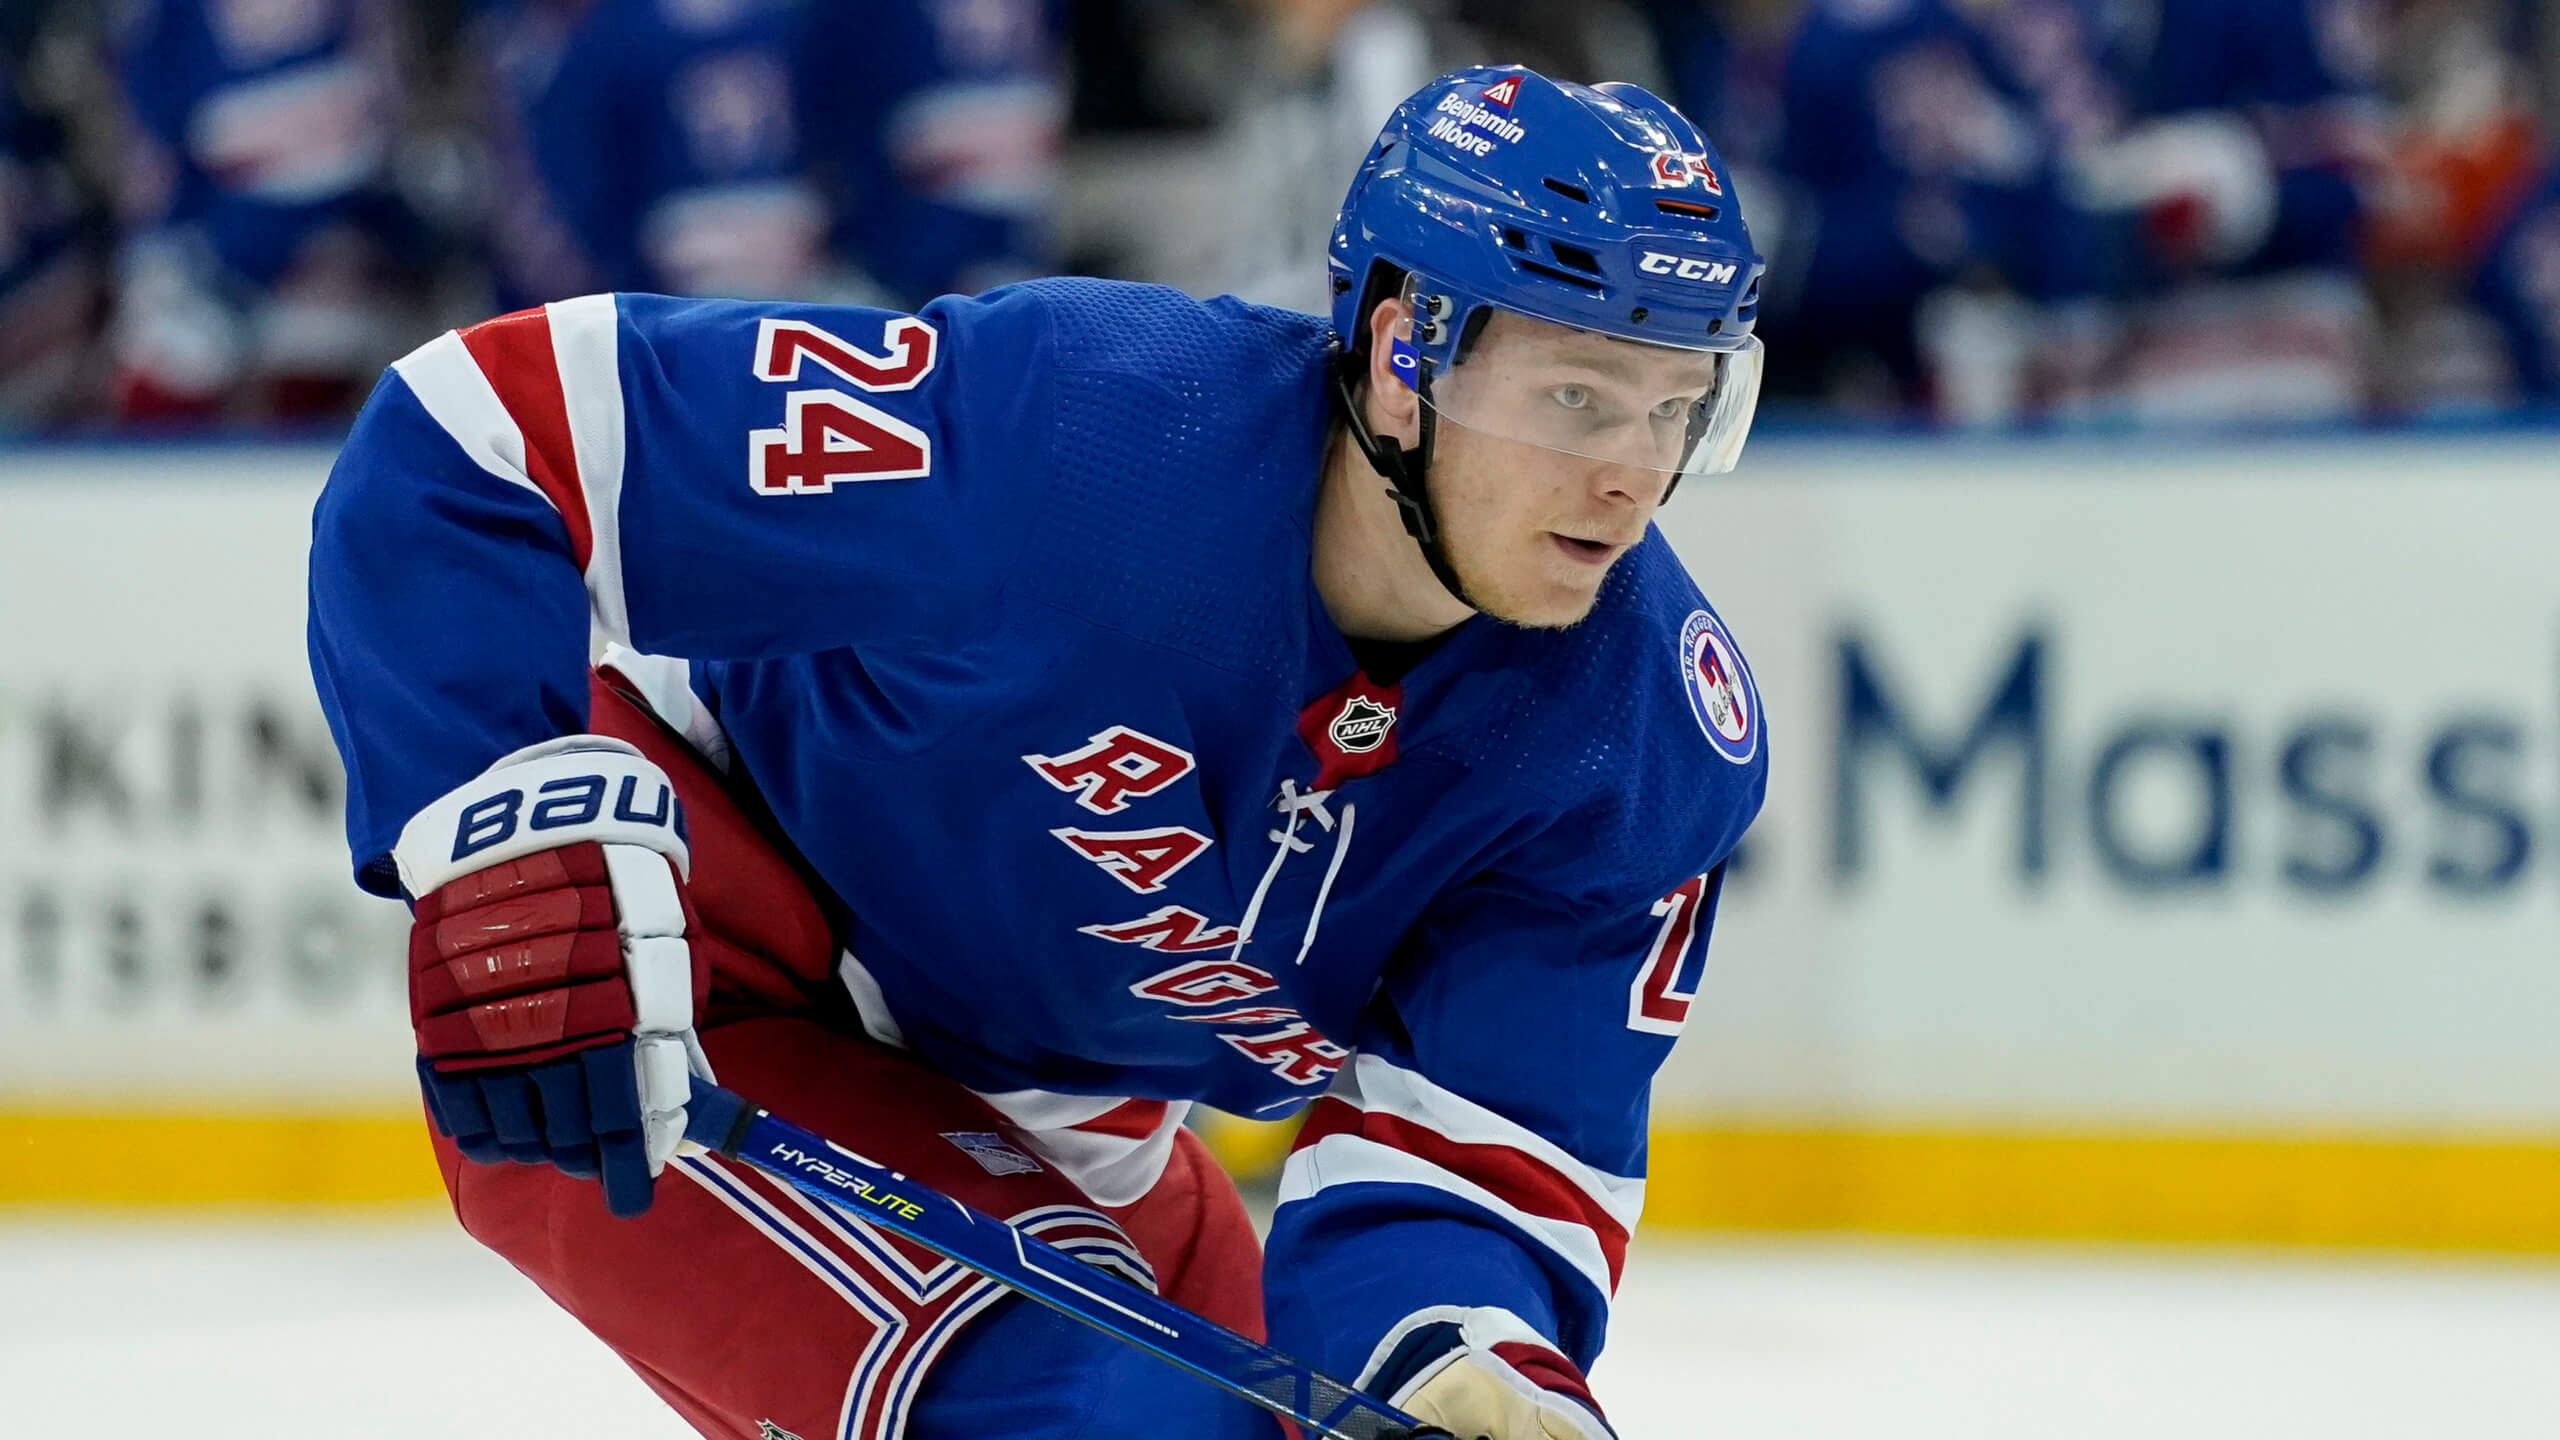 New York Rangers newer, younger and mobile defense